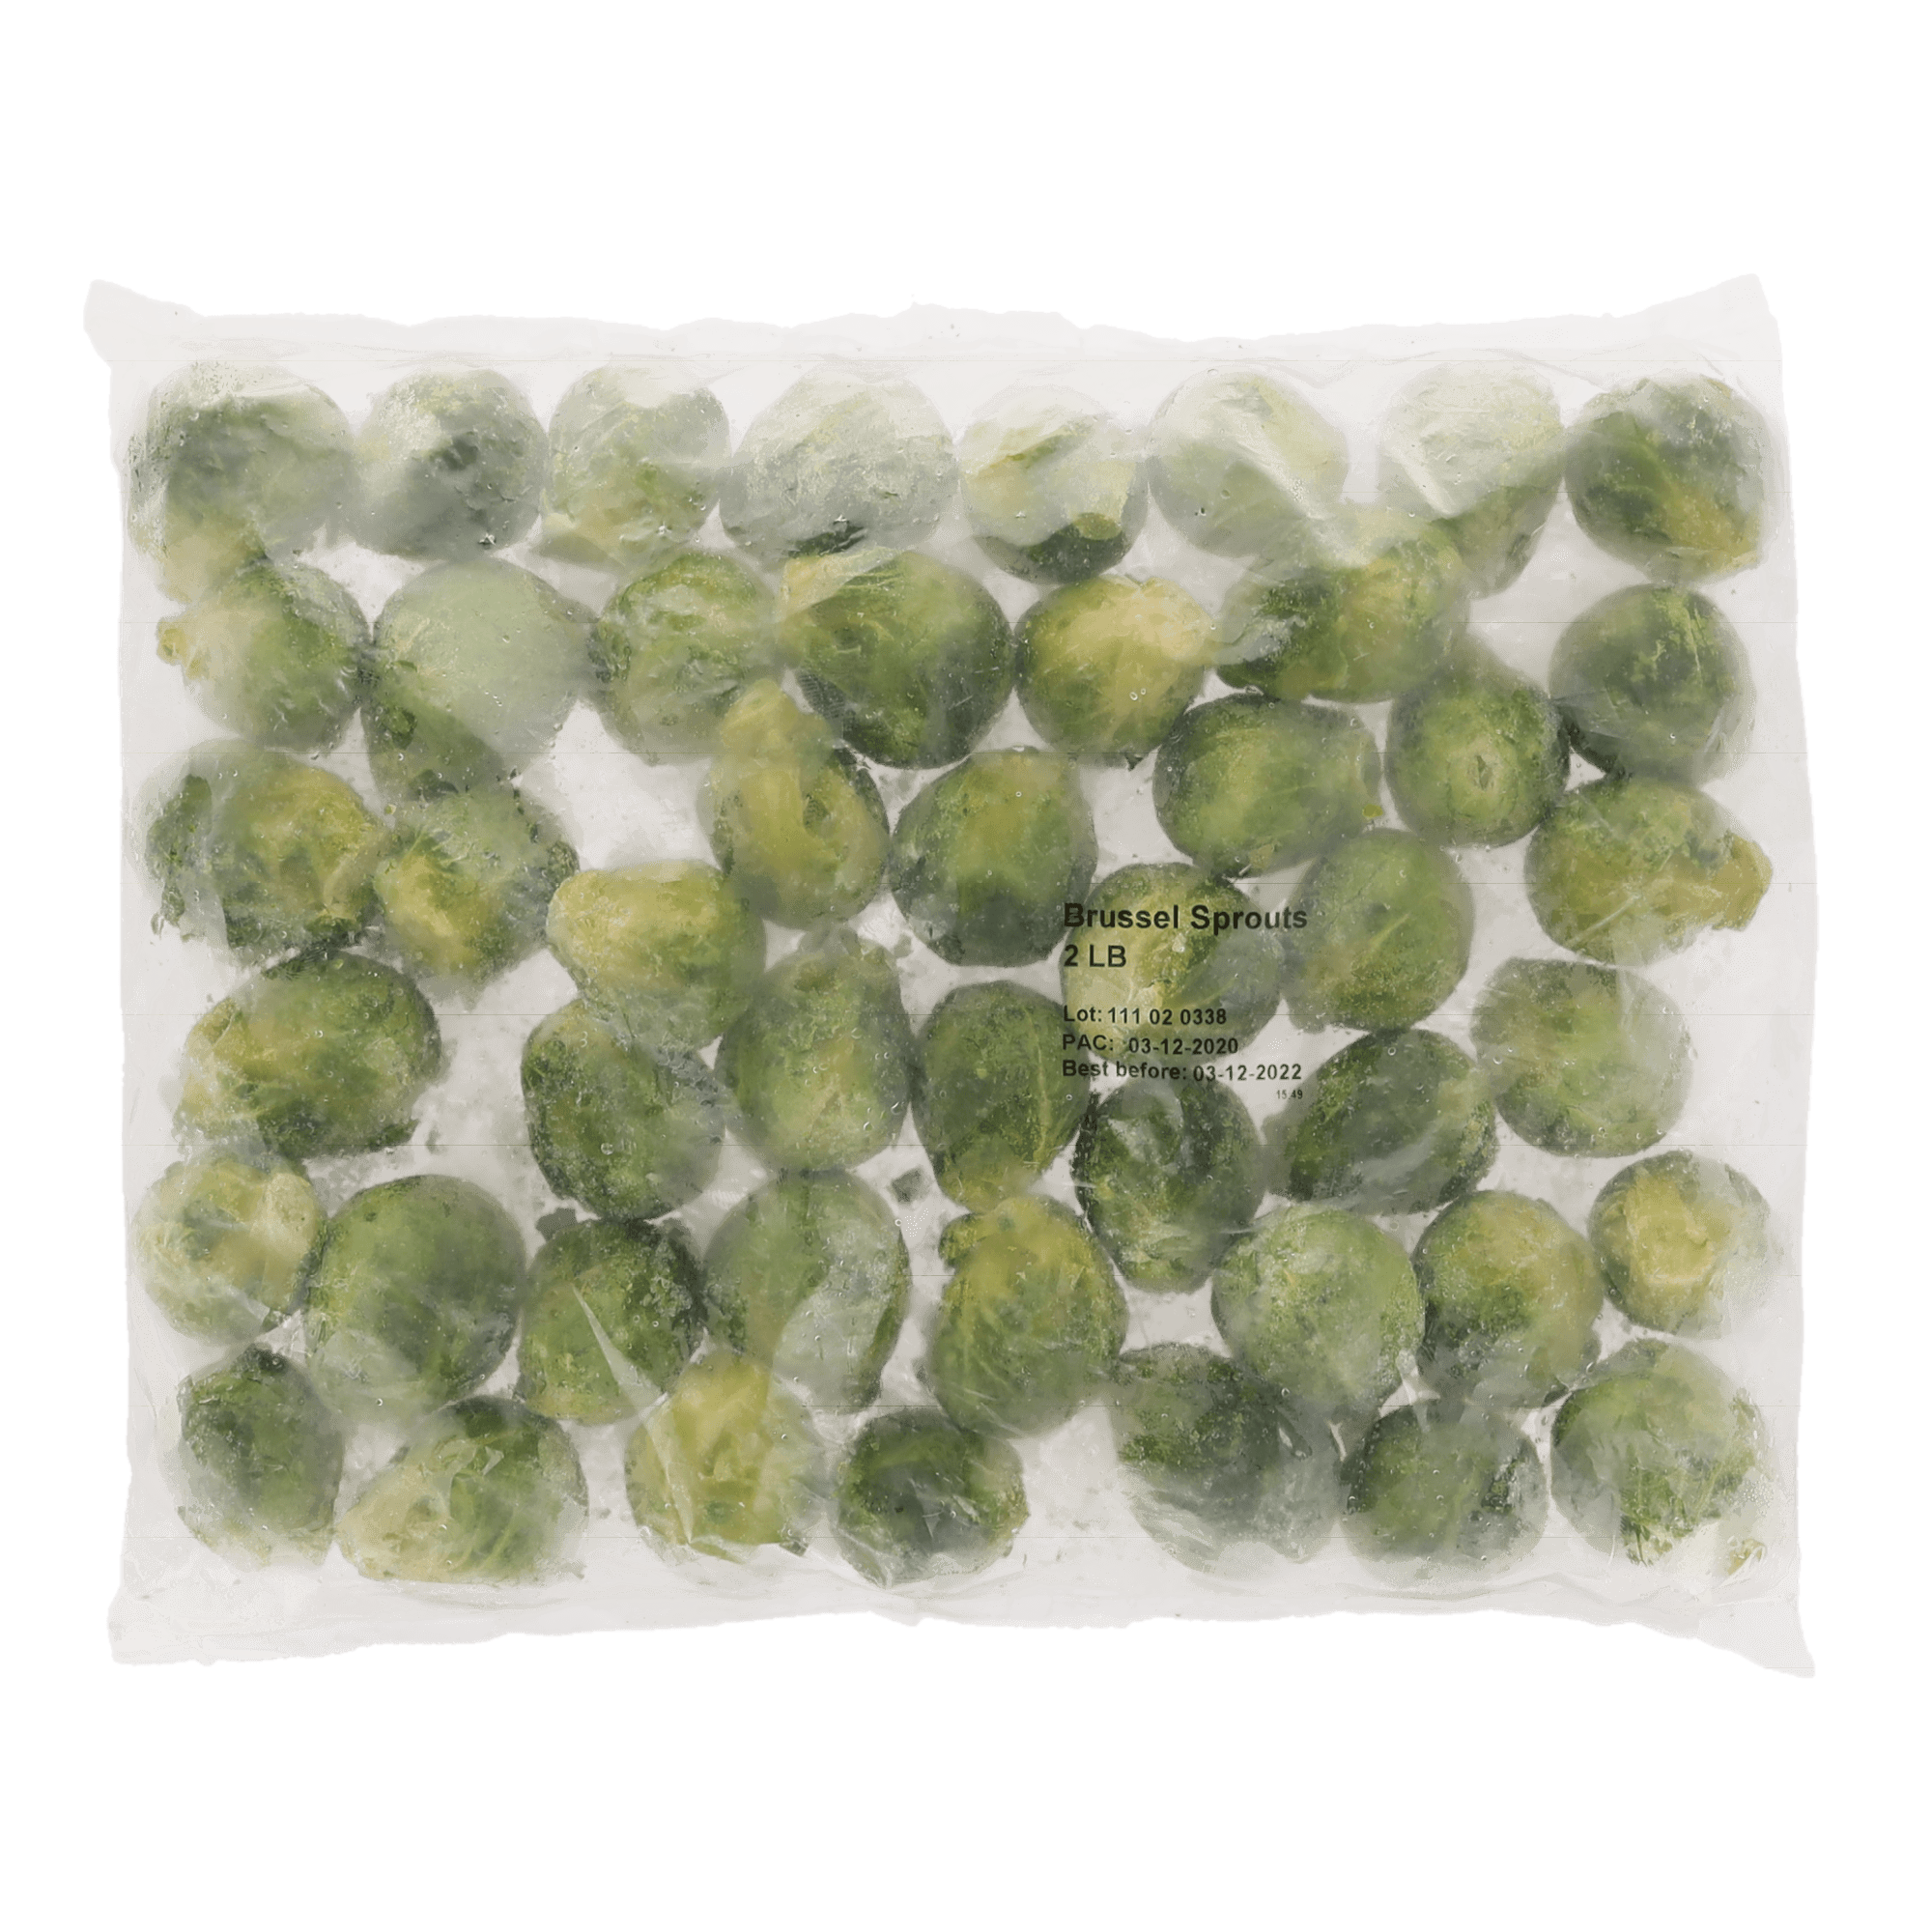 Brussel Sprouts - Savory Gourmet